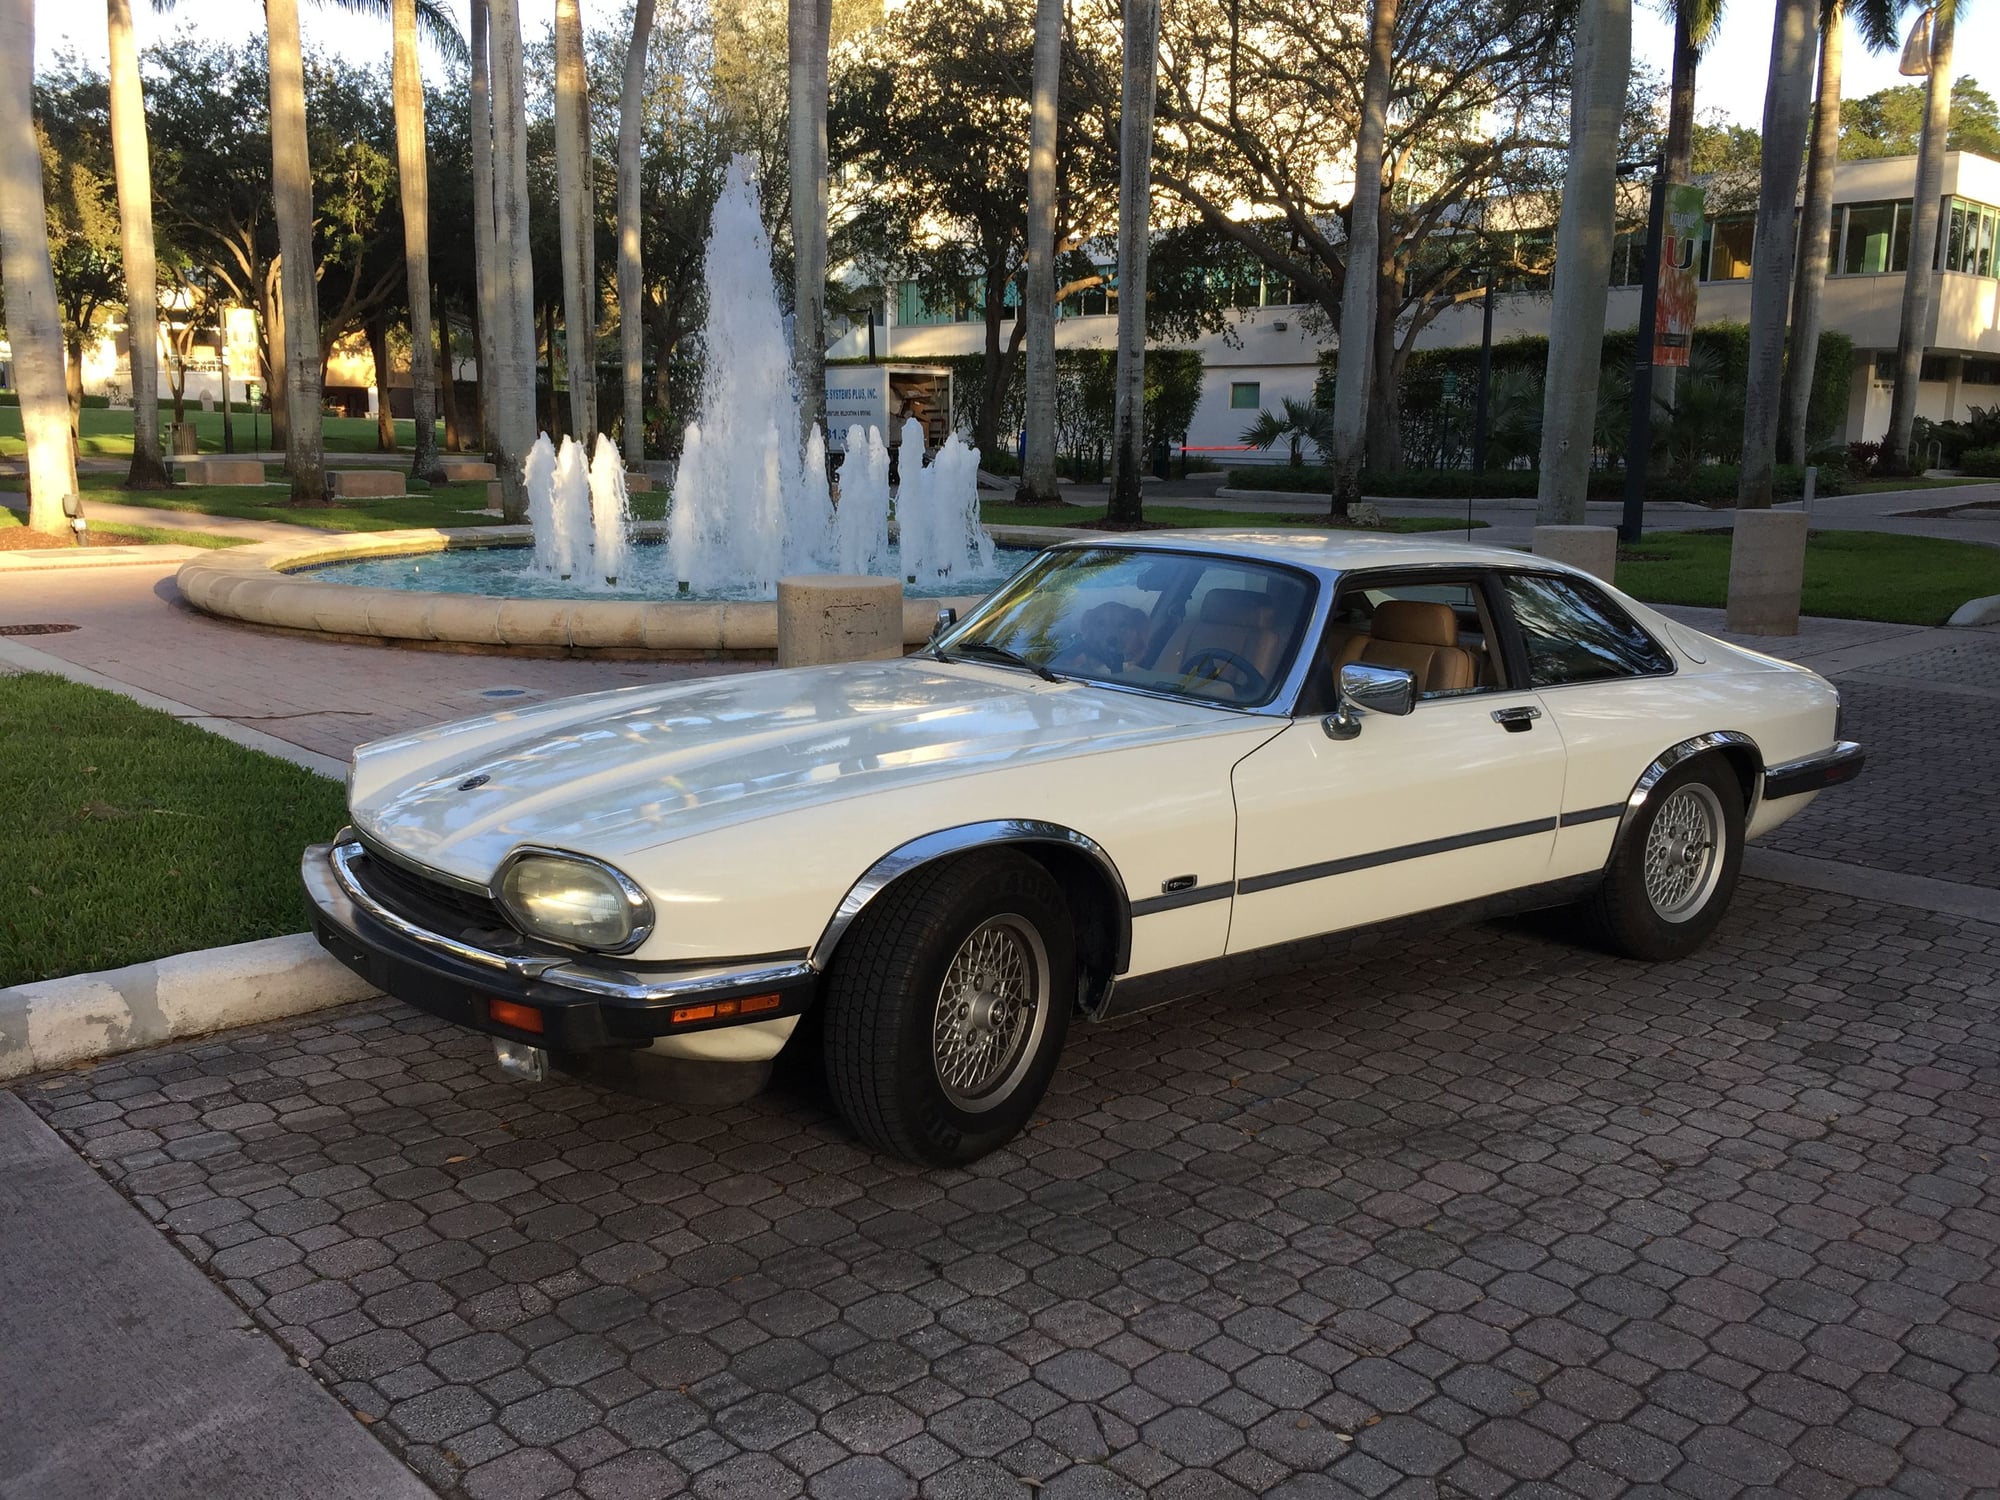 1992 Jaguar XJS - 1992 Jaguar XJS V12 Coupe with 56,000 miles - Used - VIN SAJNW5846NC182111 - 56,000 Miles - 12 cyl - 2WD - Automatic - Coupe - White - South Miami, FL 33143, United States